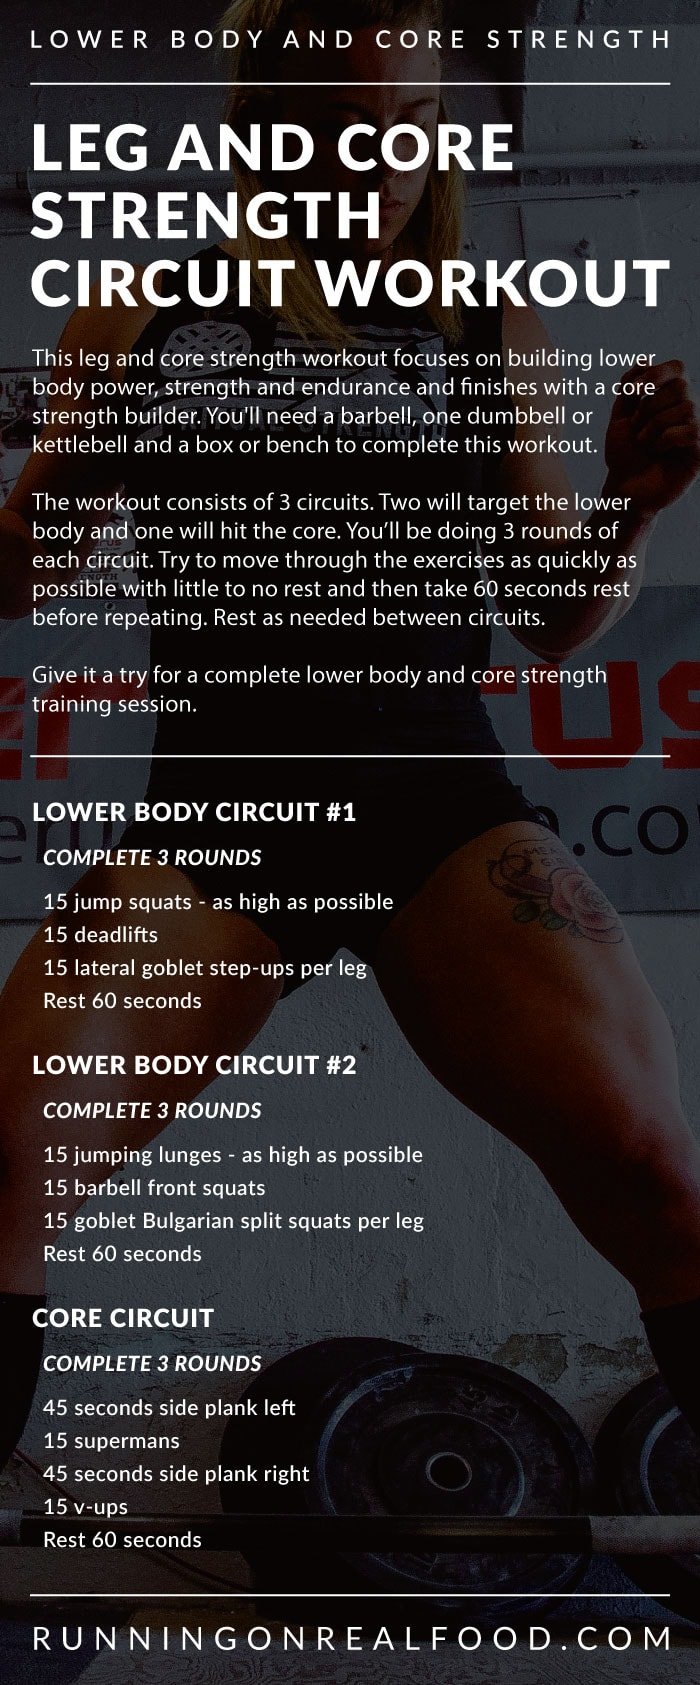 Leg and Core Strength Circuit Training Workout - Running on Real Food Workuts